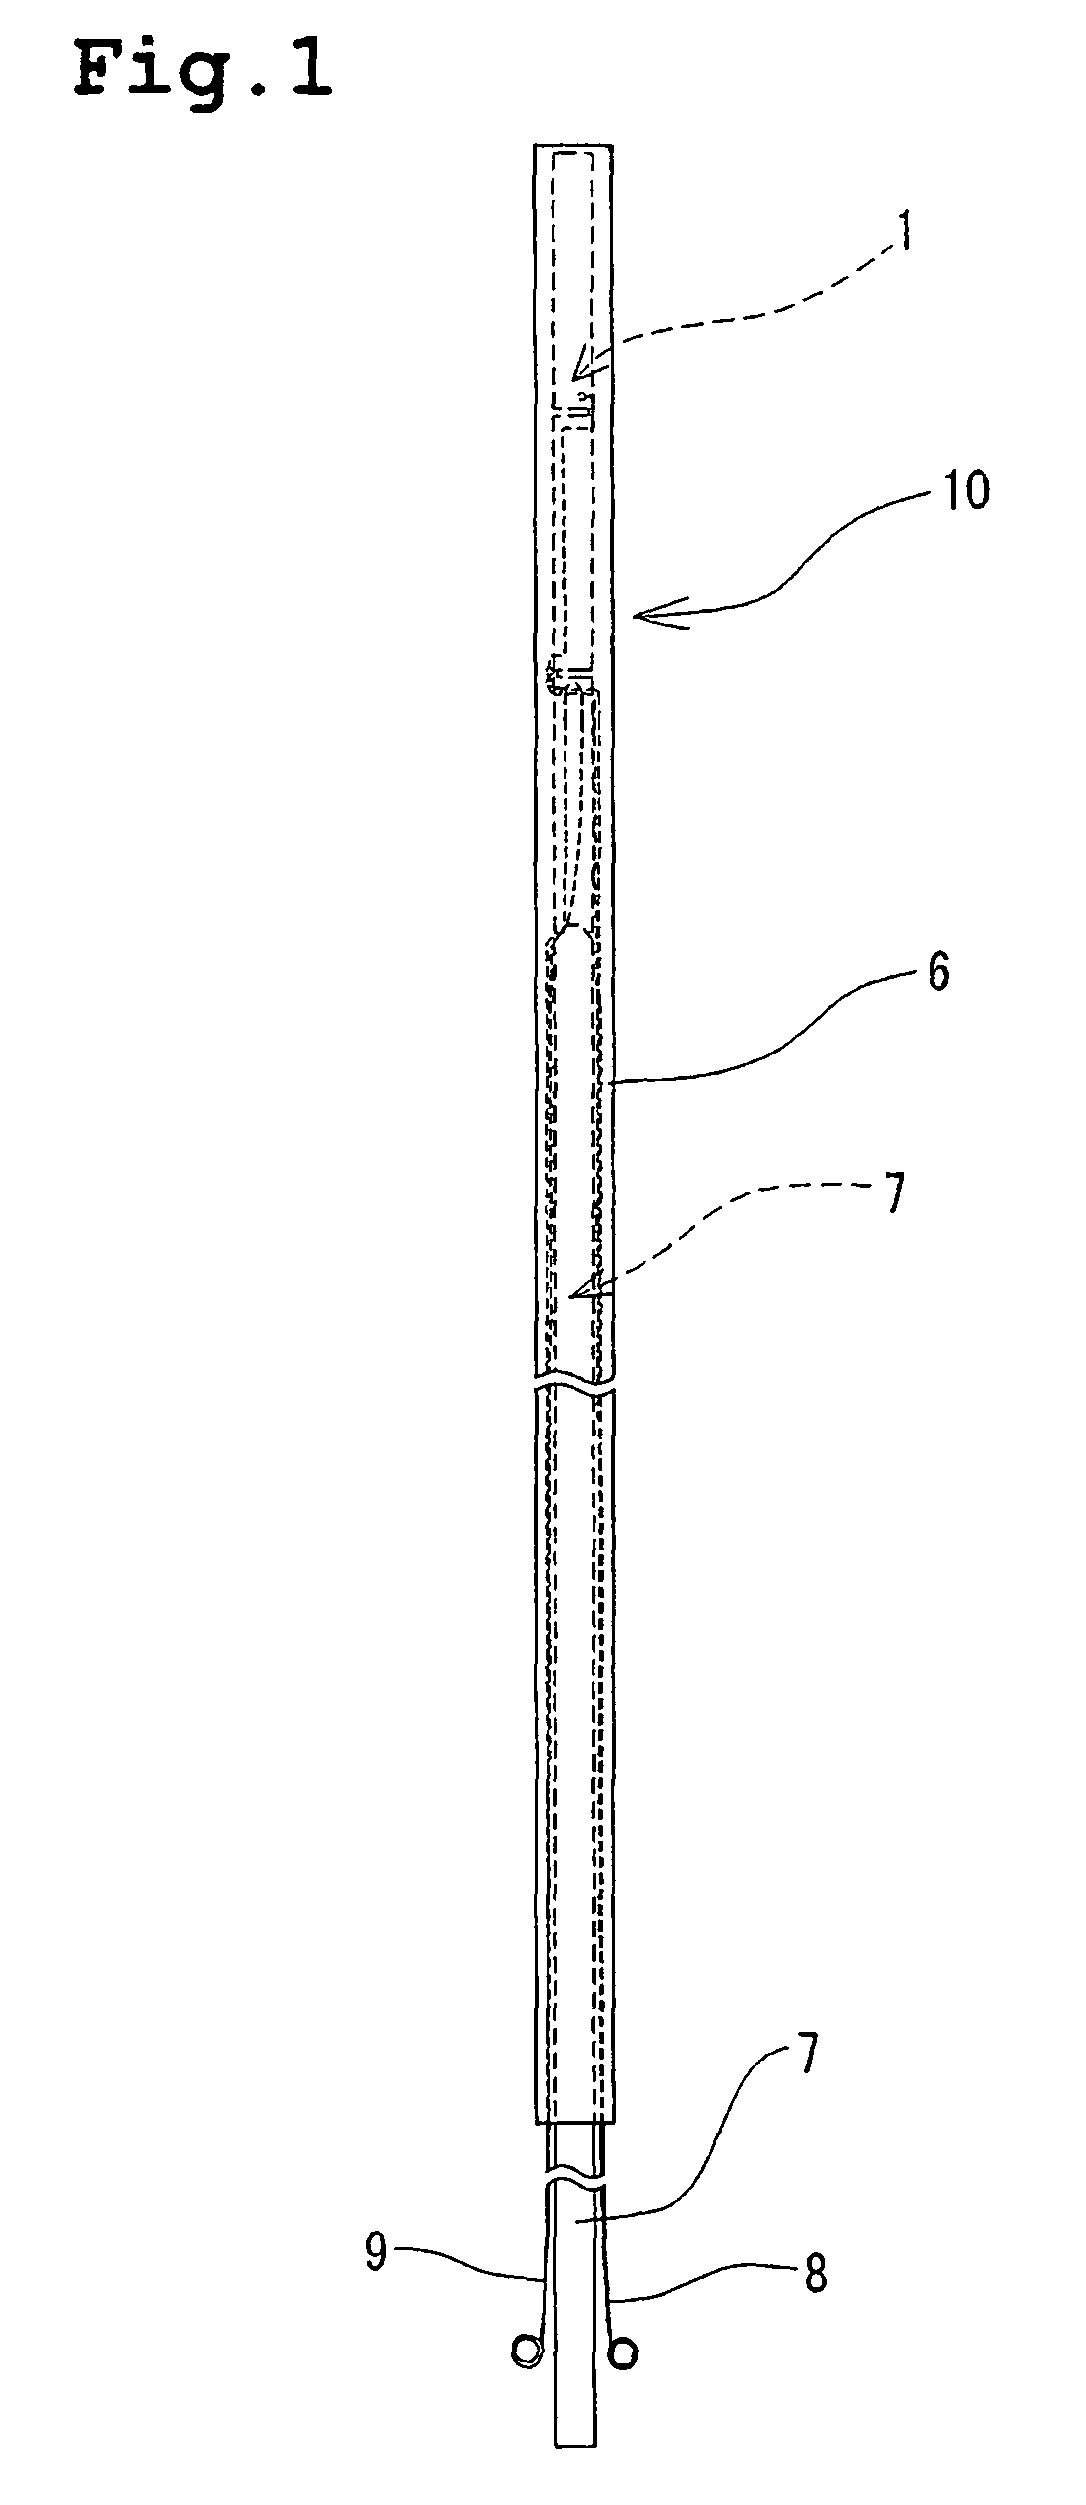 Device for treating a patent foramen ovale